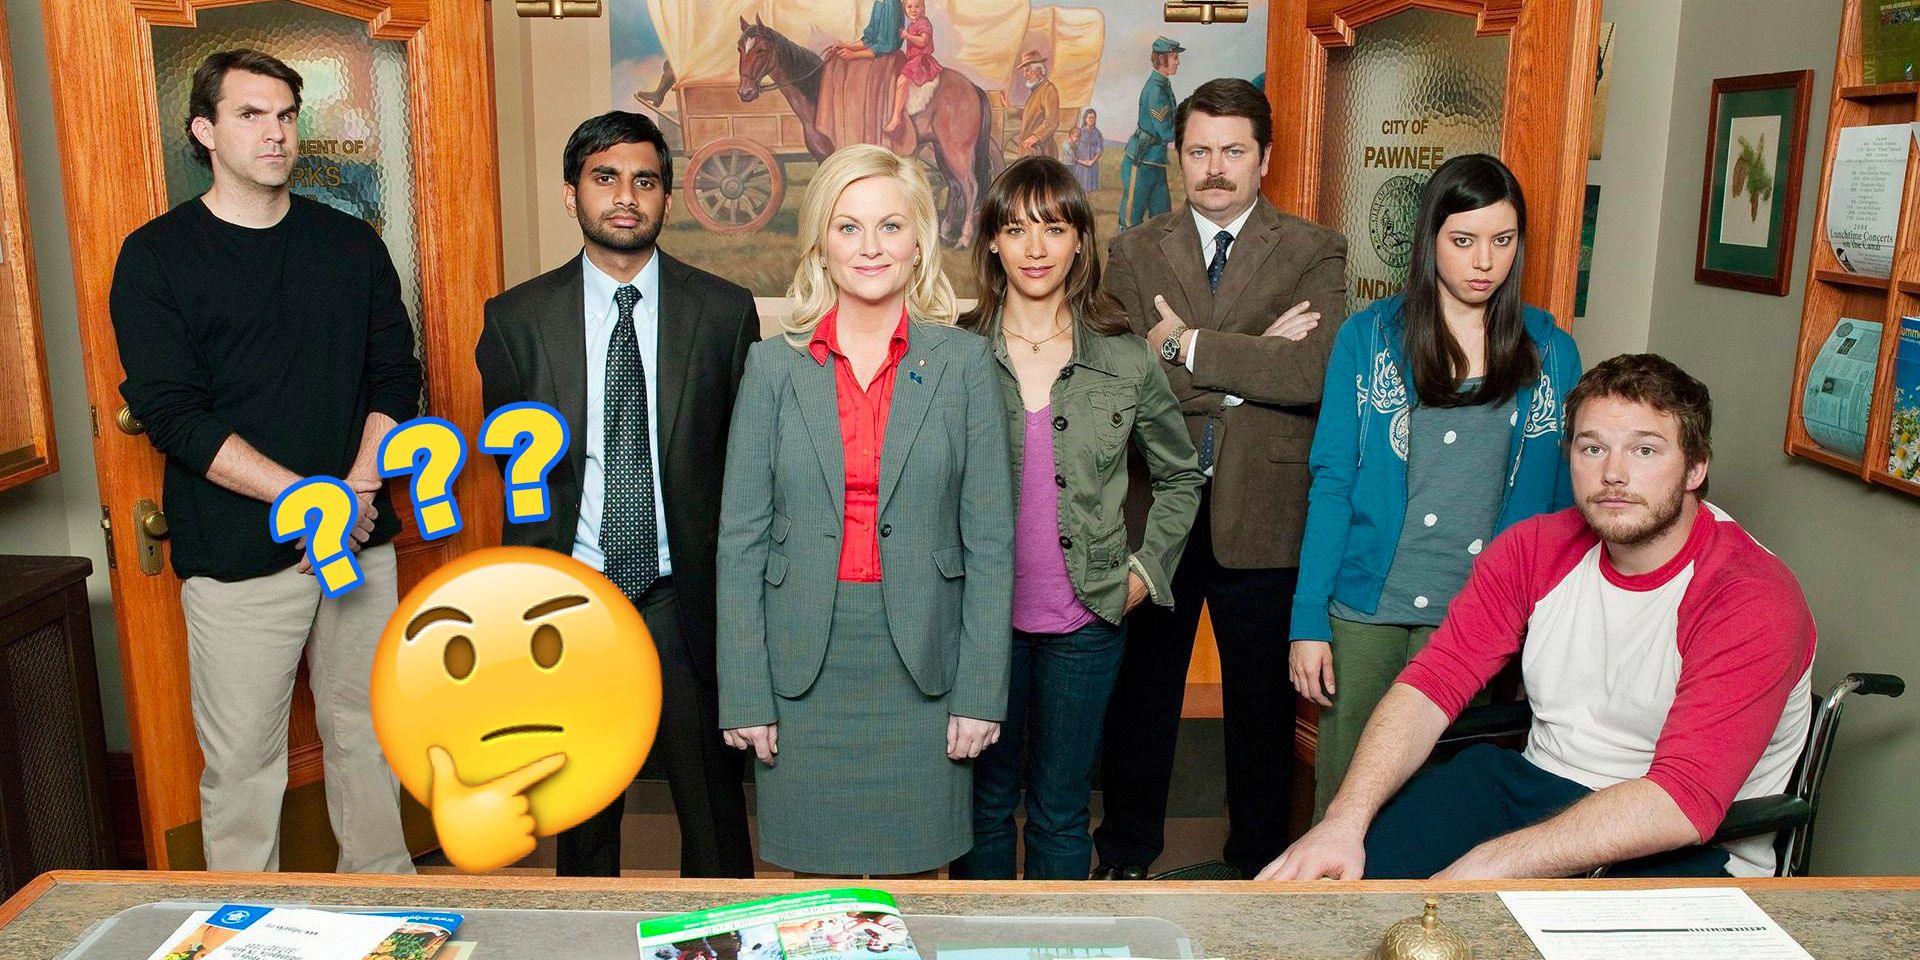 minor parks and rec characters